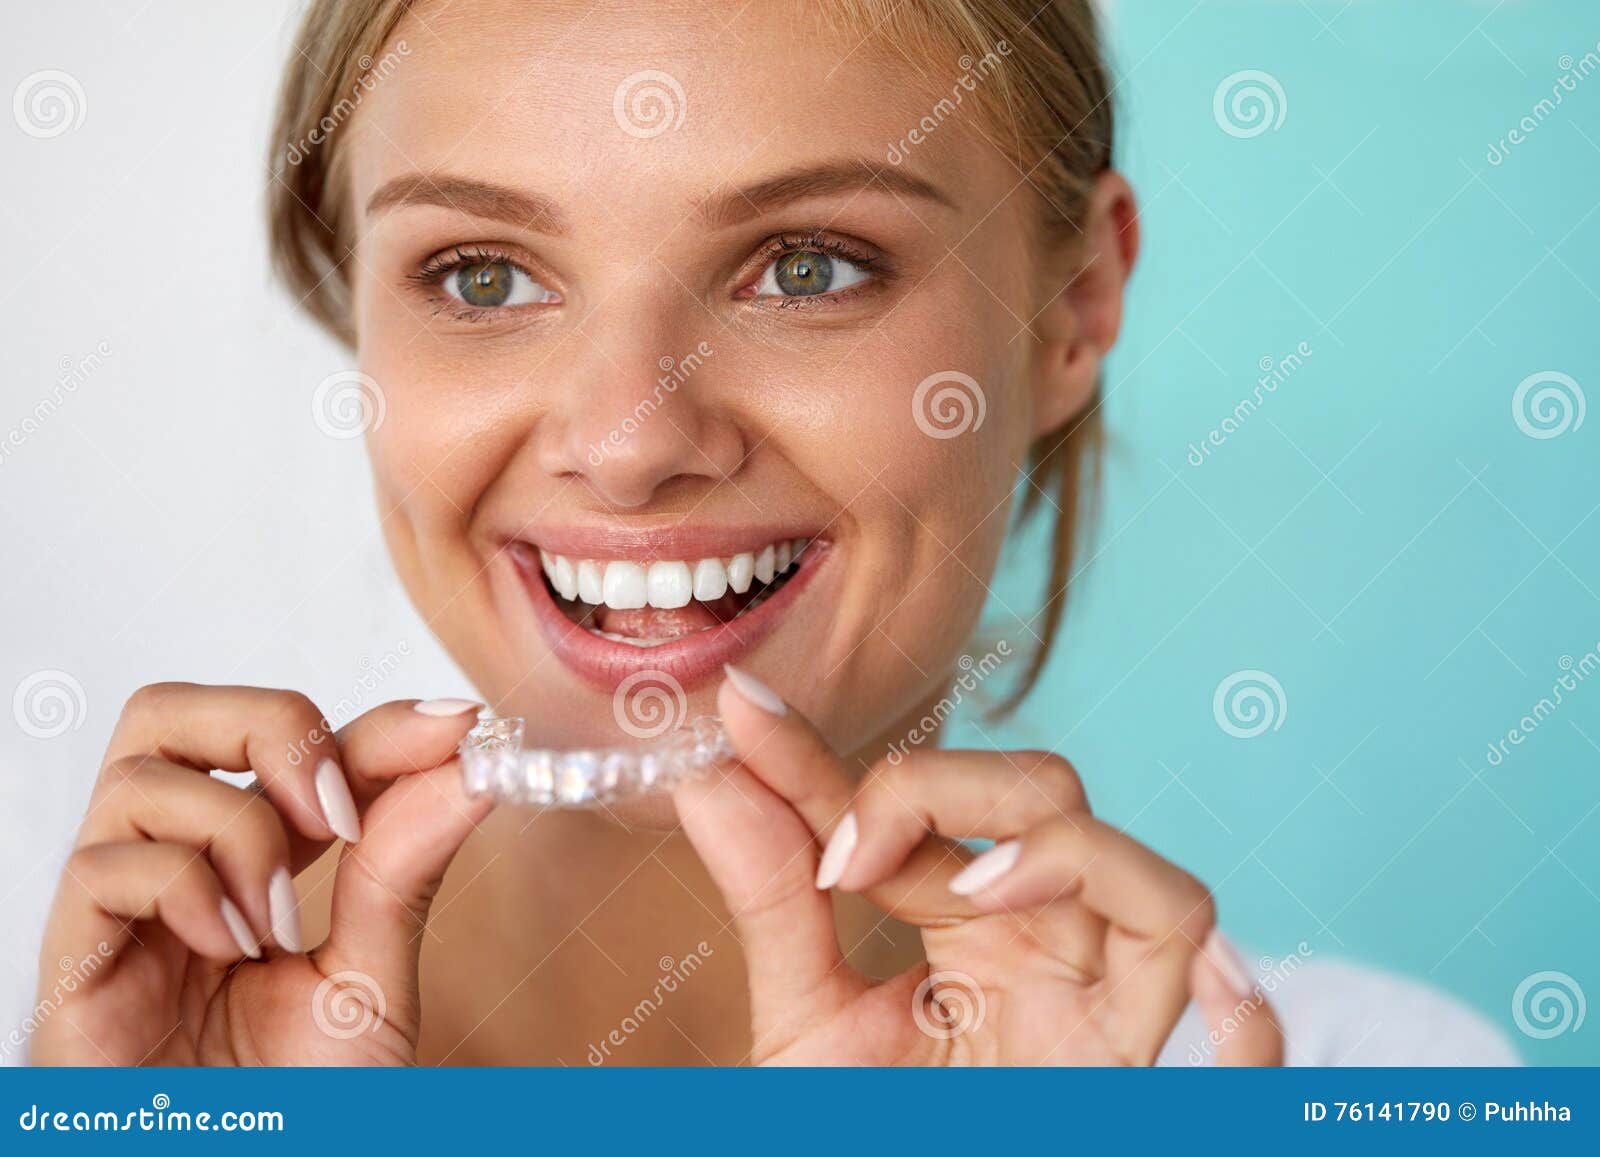 smiling woman with beautiful smile using teeth whitening tray